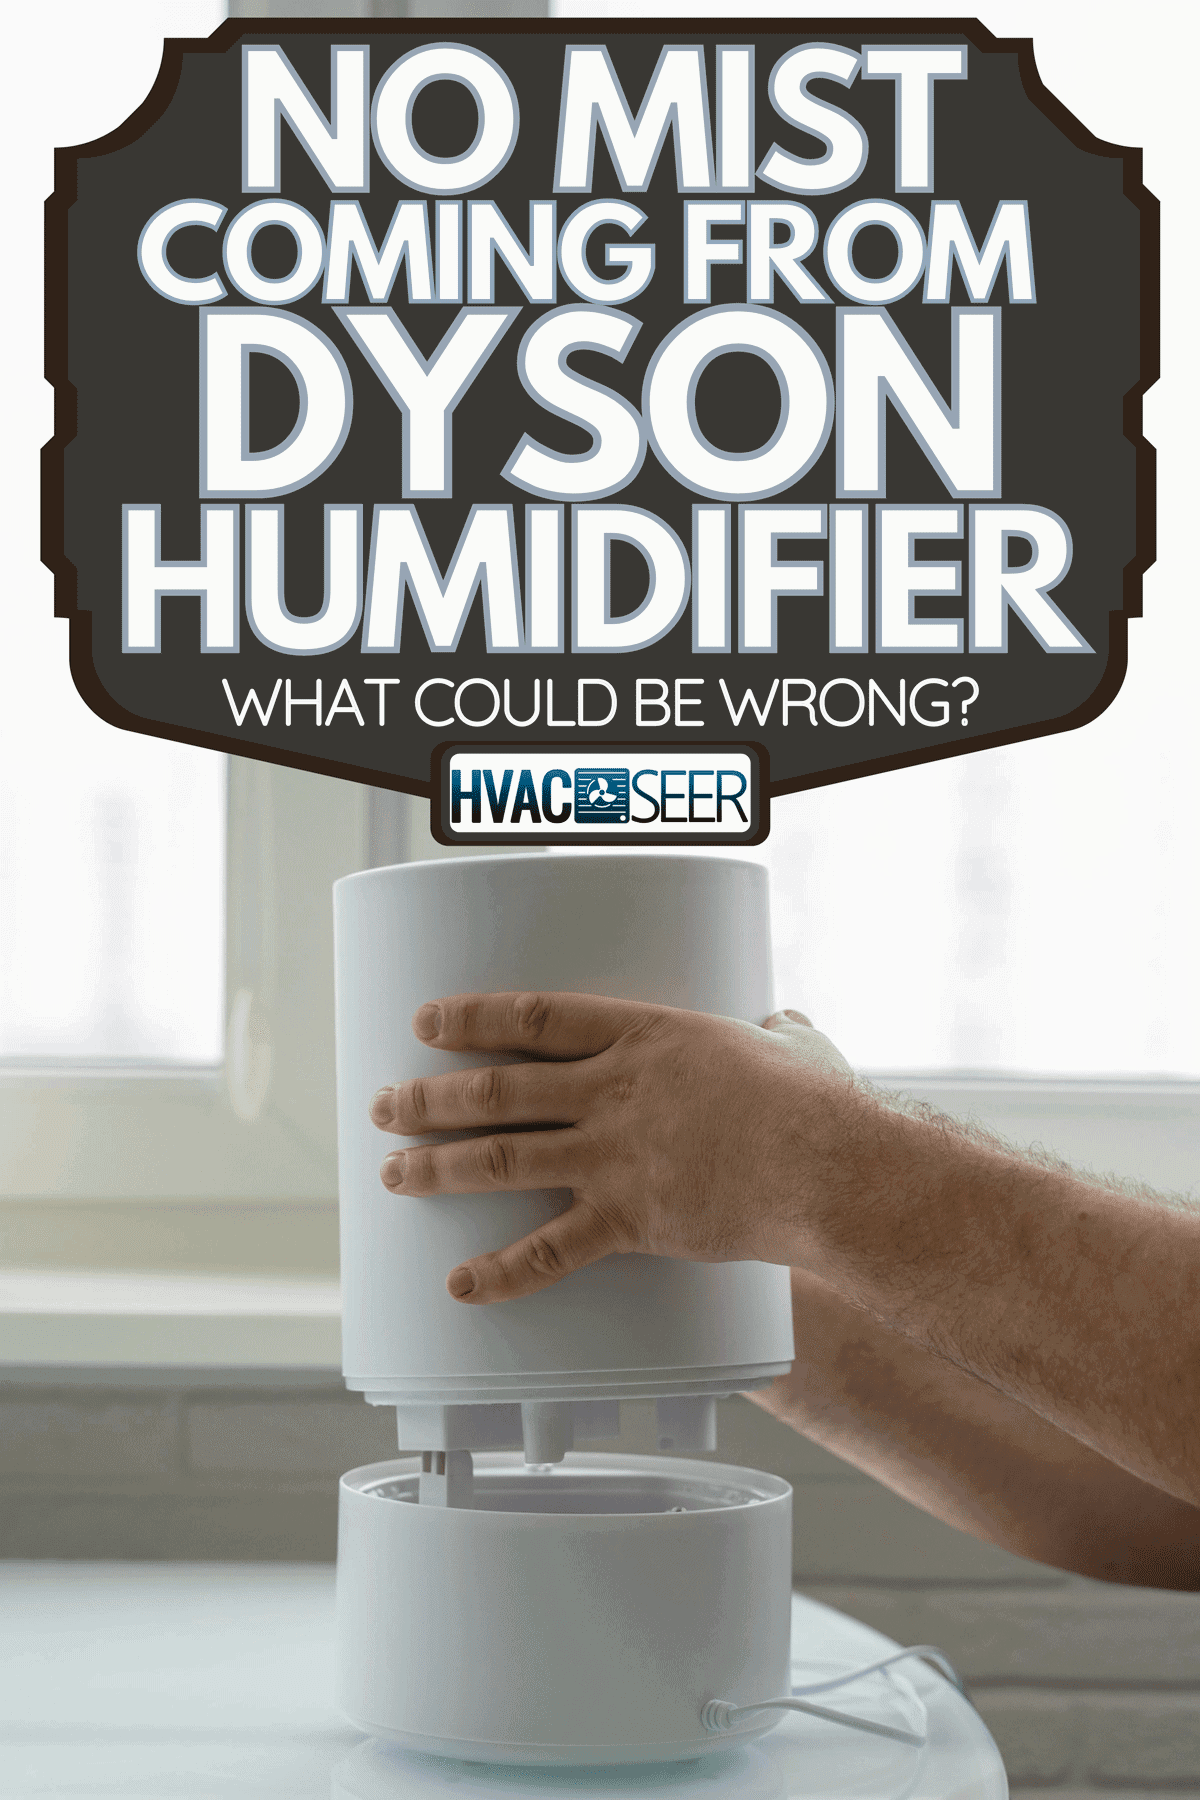 A man uses a humidifier at home, No Mist Coming From Dyson Humidifier—What Could Be Wrong?